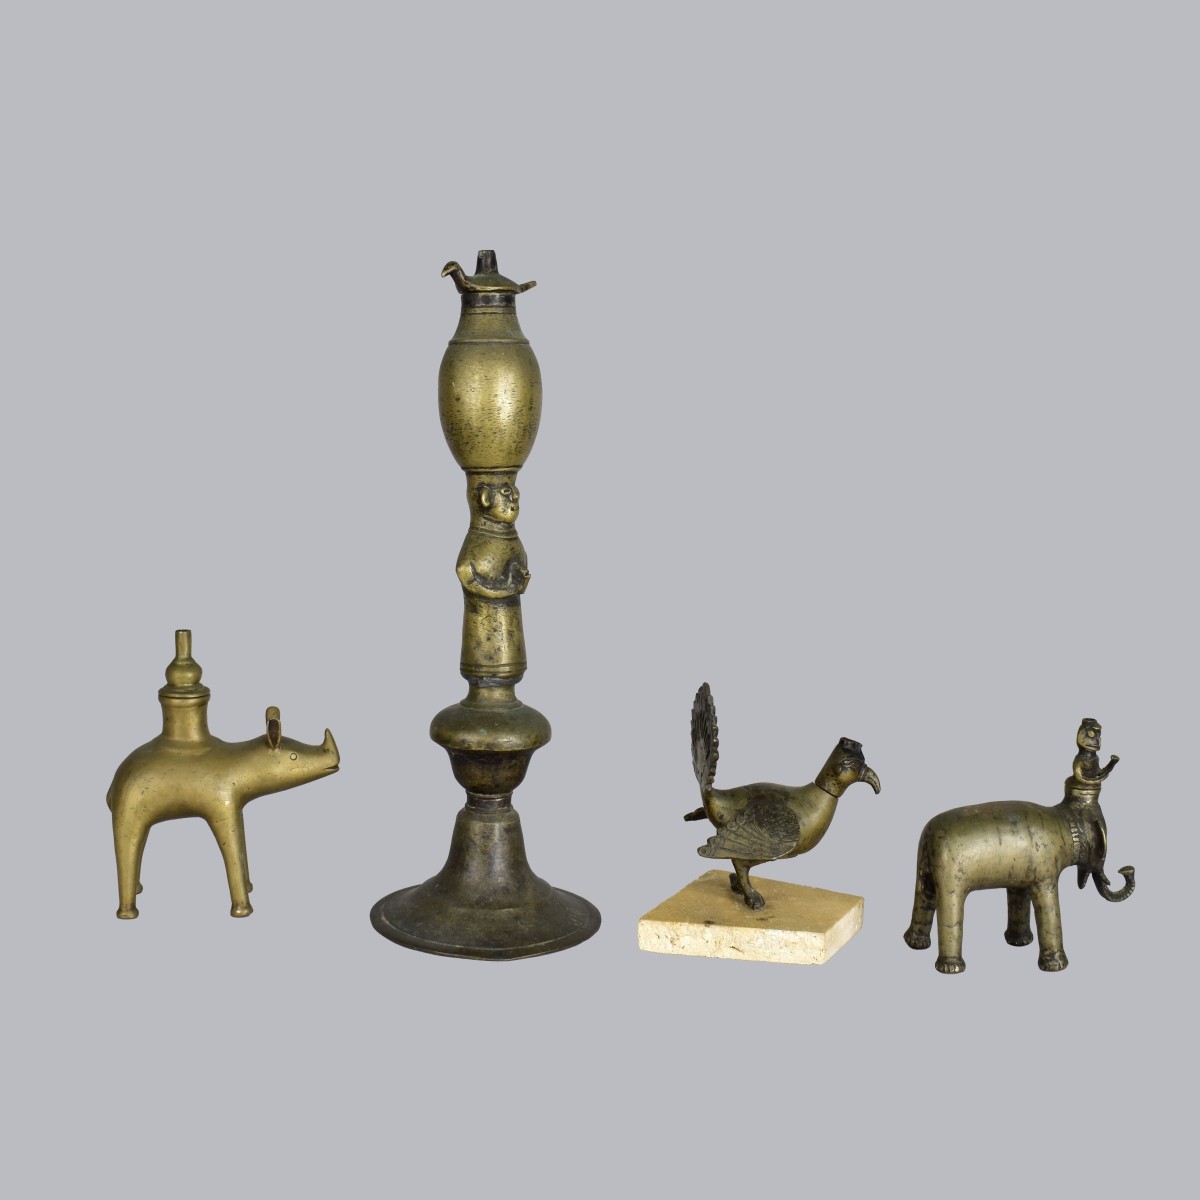 Four Brass Incense Burners